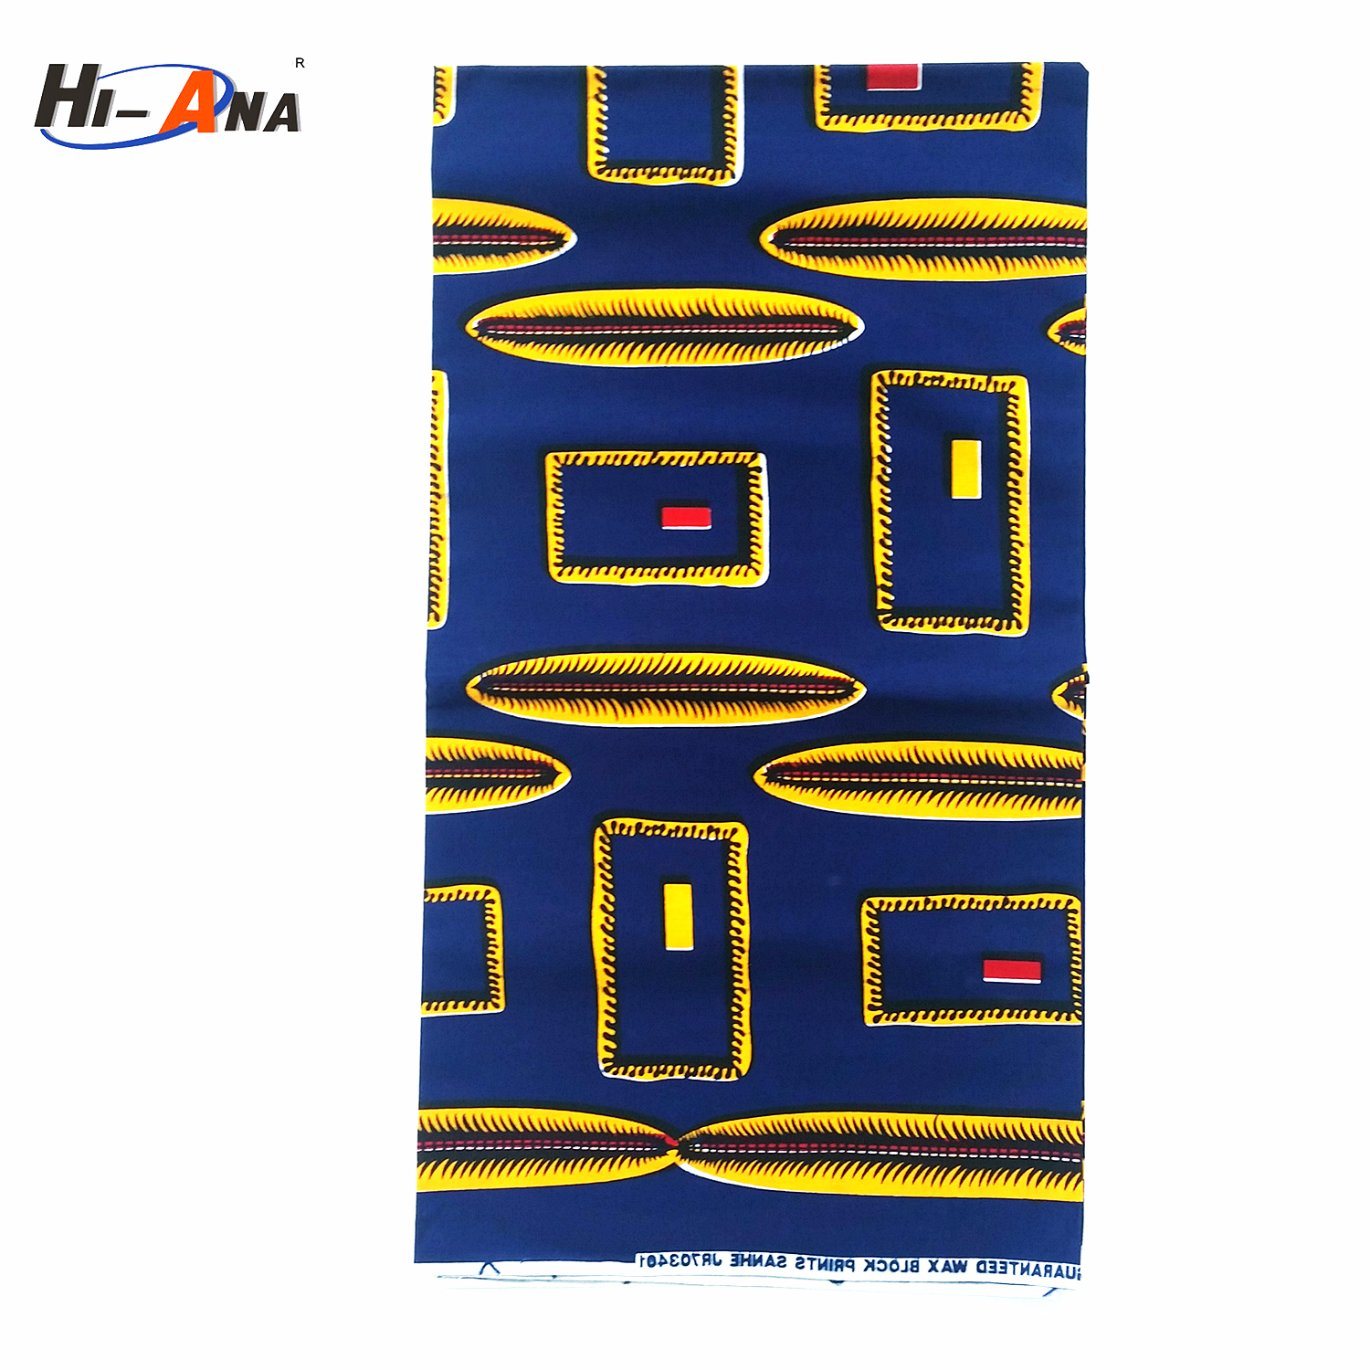 Excellent Sales Staffs Finest Quality Printed Fabric